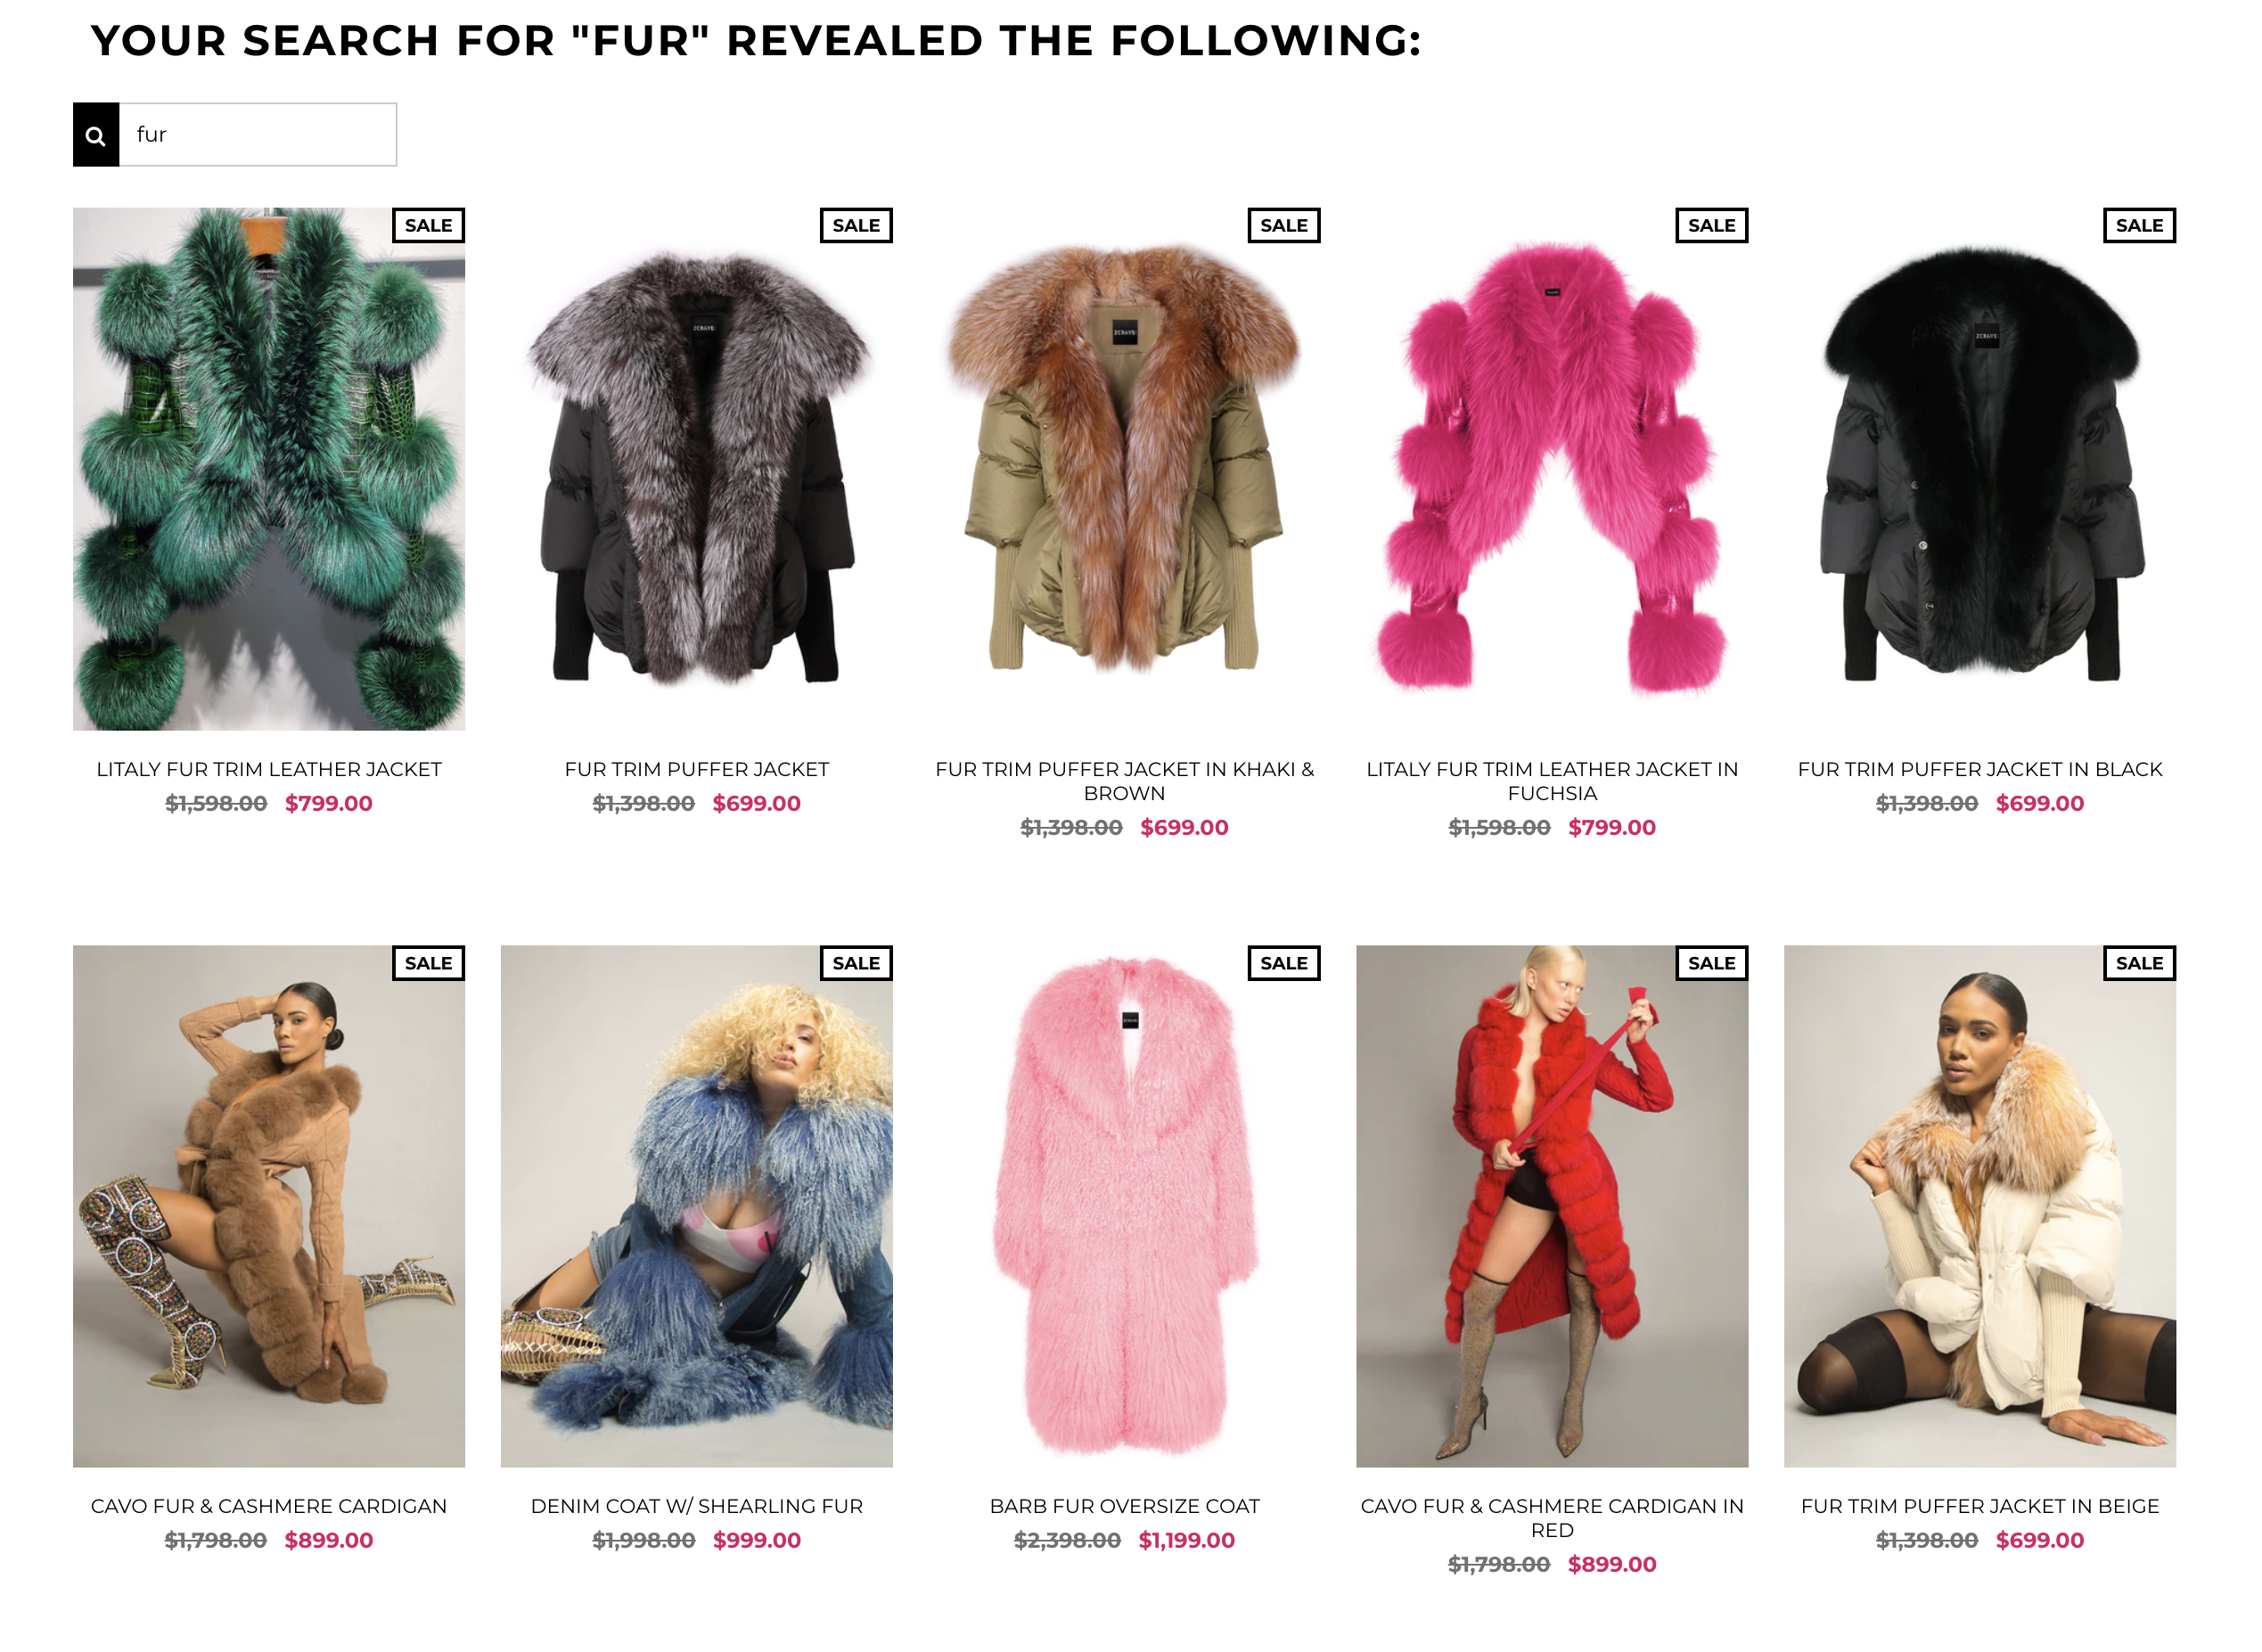 ZCRAVE online store with a lot of fur coats